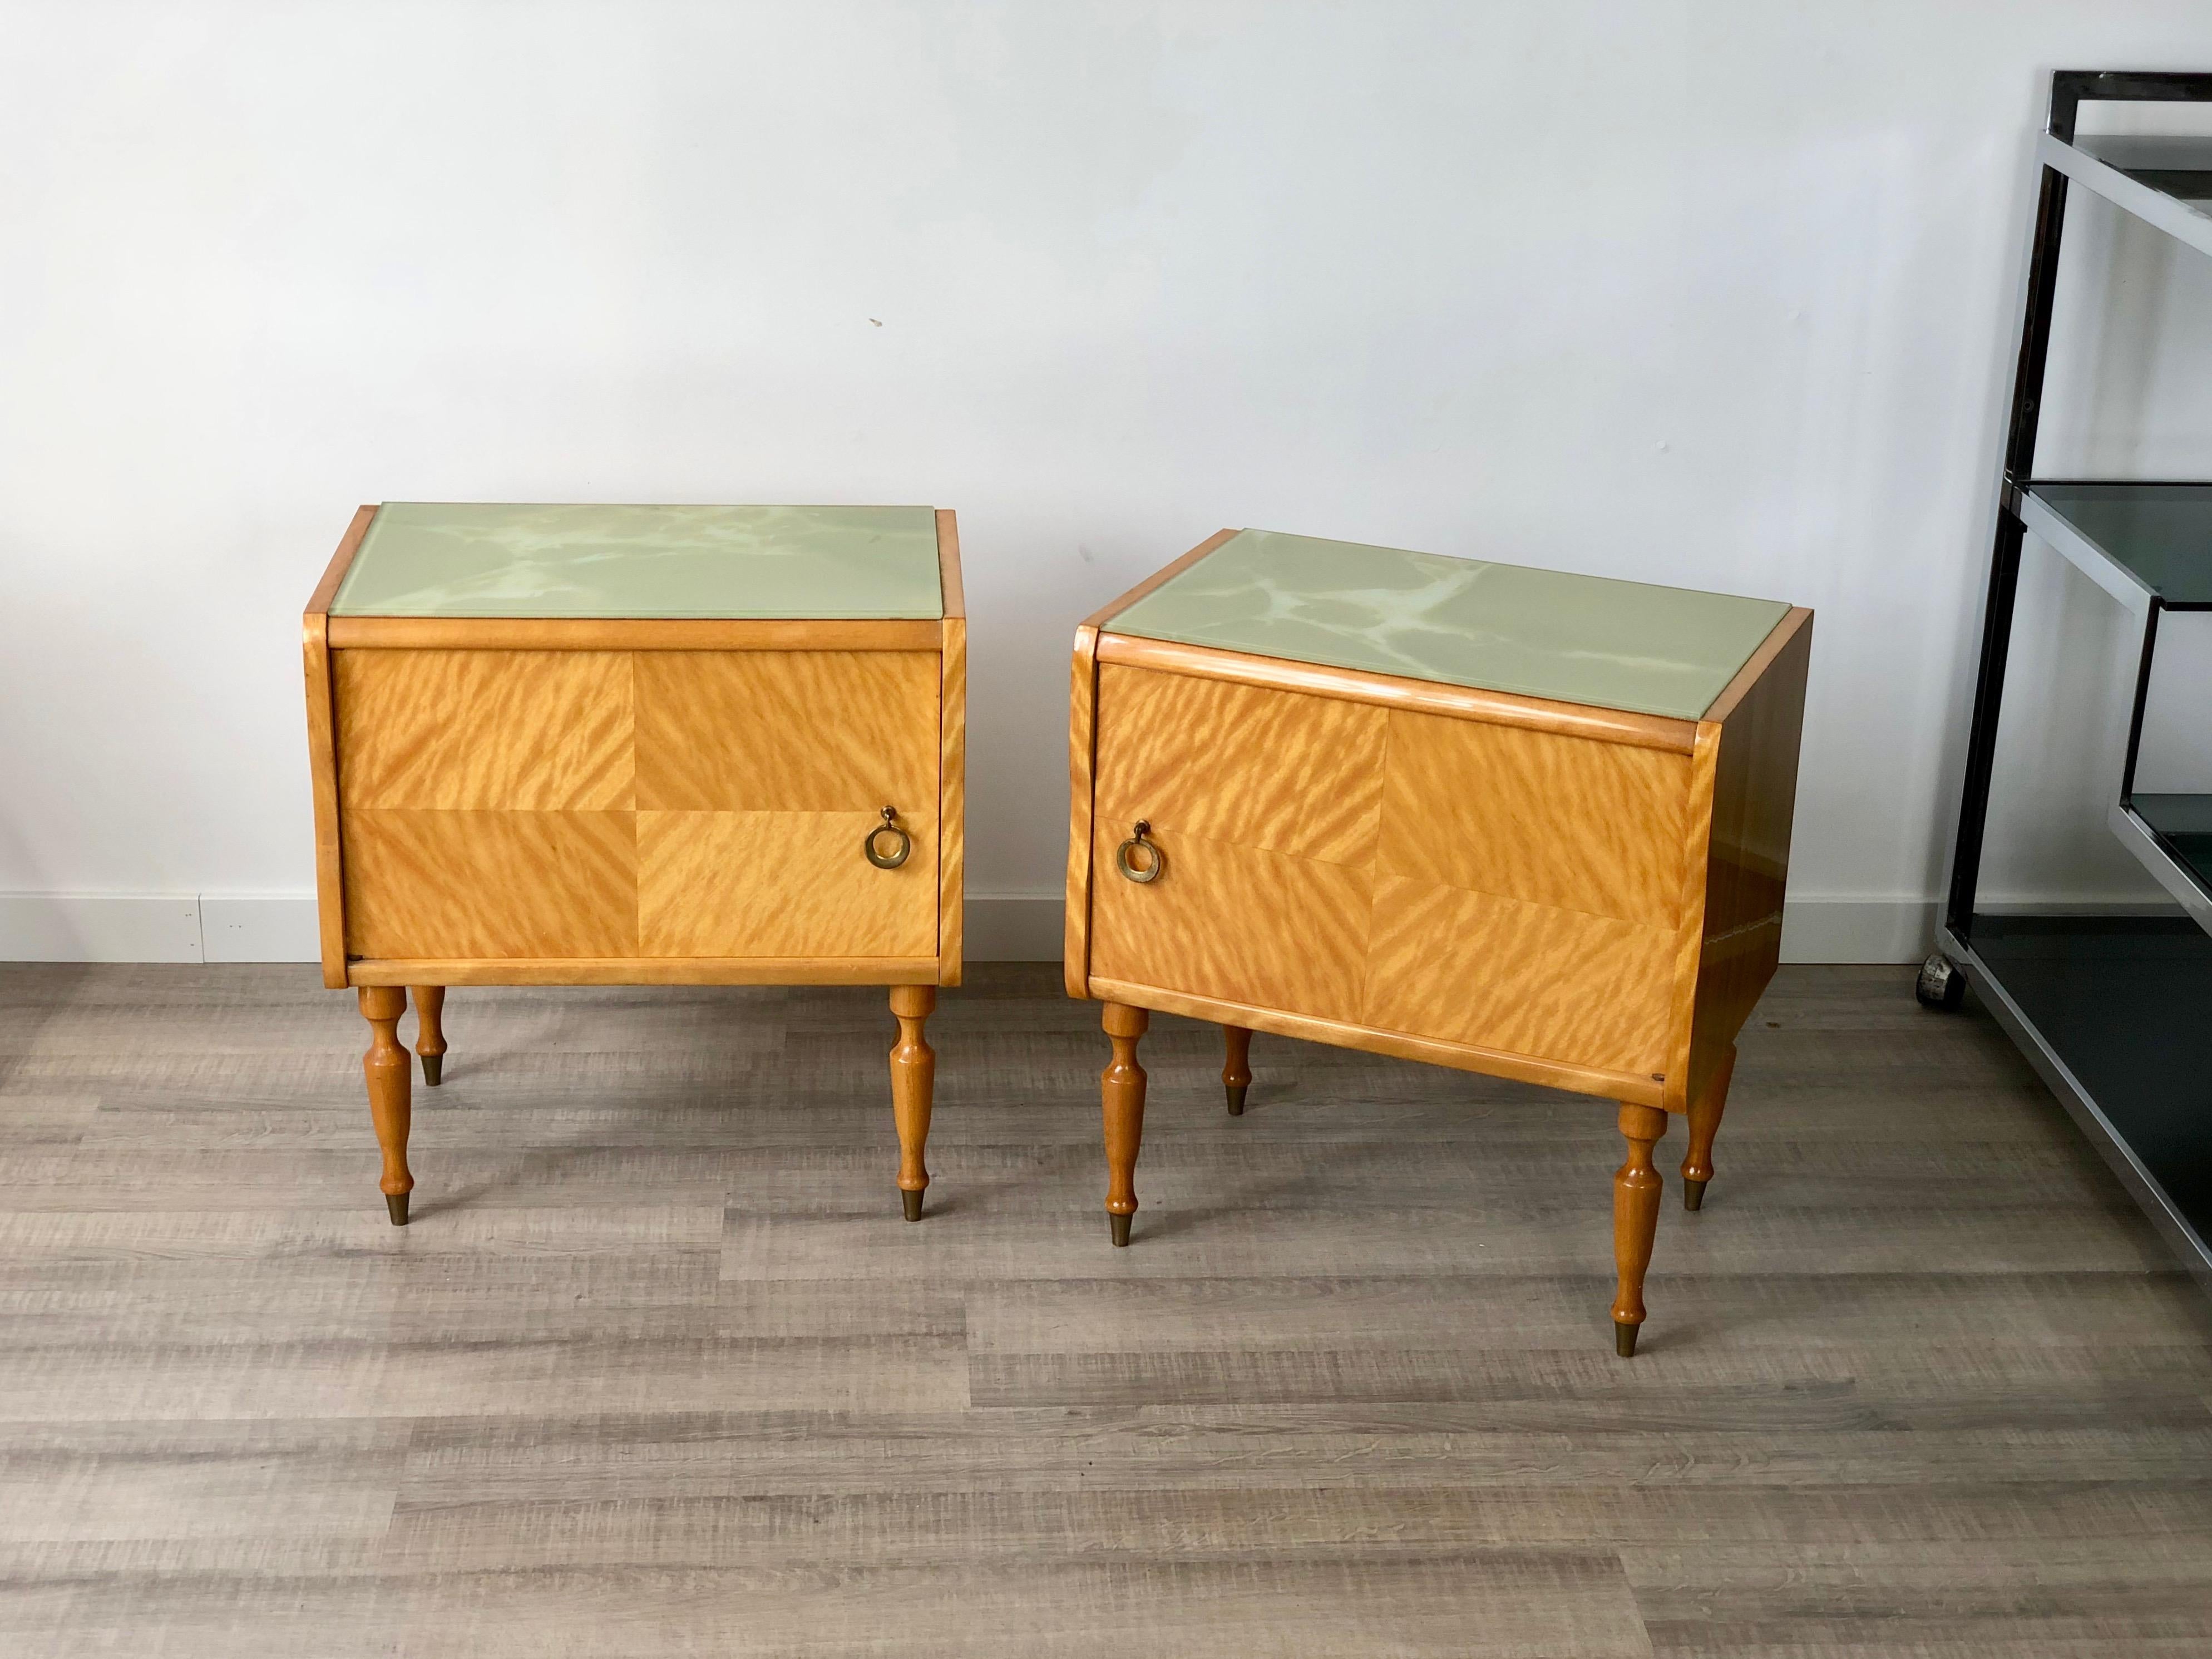 Pair of two nightstands/ side tables in Vittorio Dassi style made of lacquered wood and marble-effect glass surface, Italy, circa 1950.